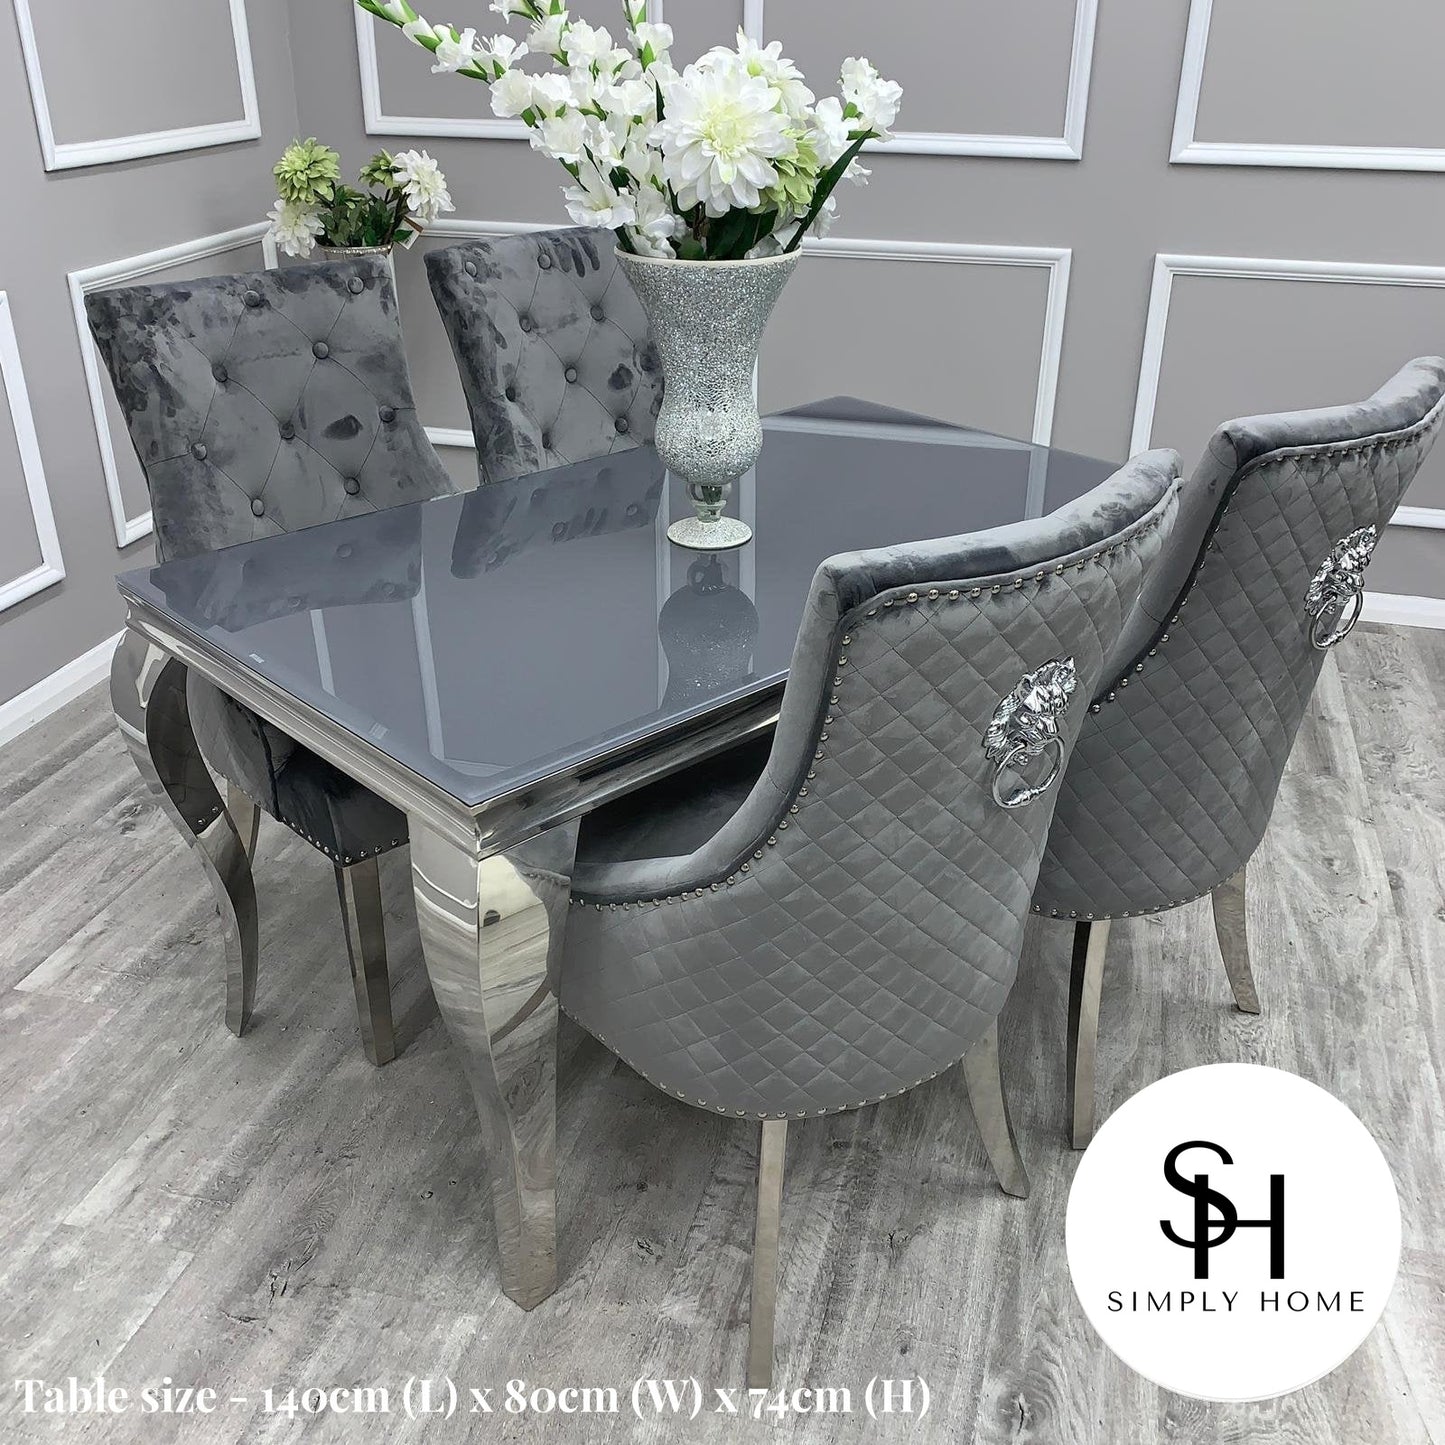 Riviera Grey Glass Dining Table with Grey Leo Chairs